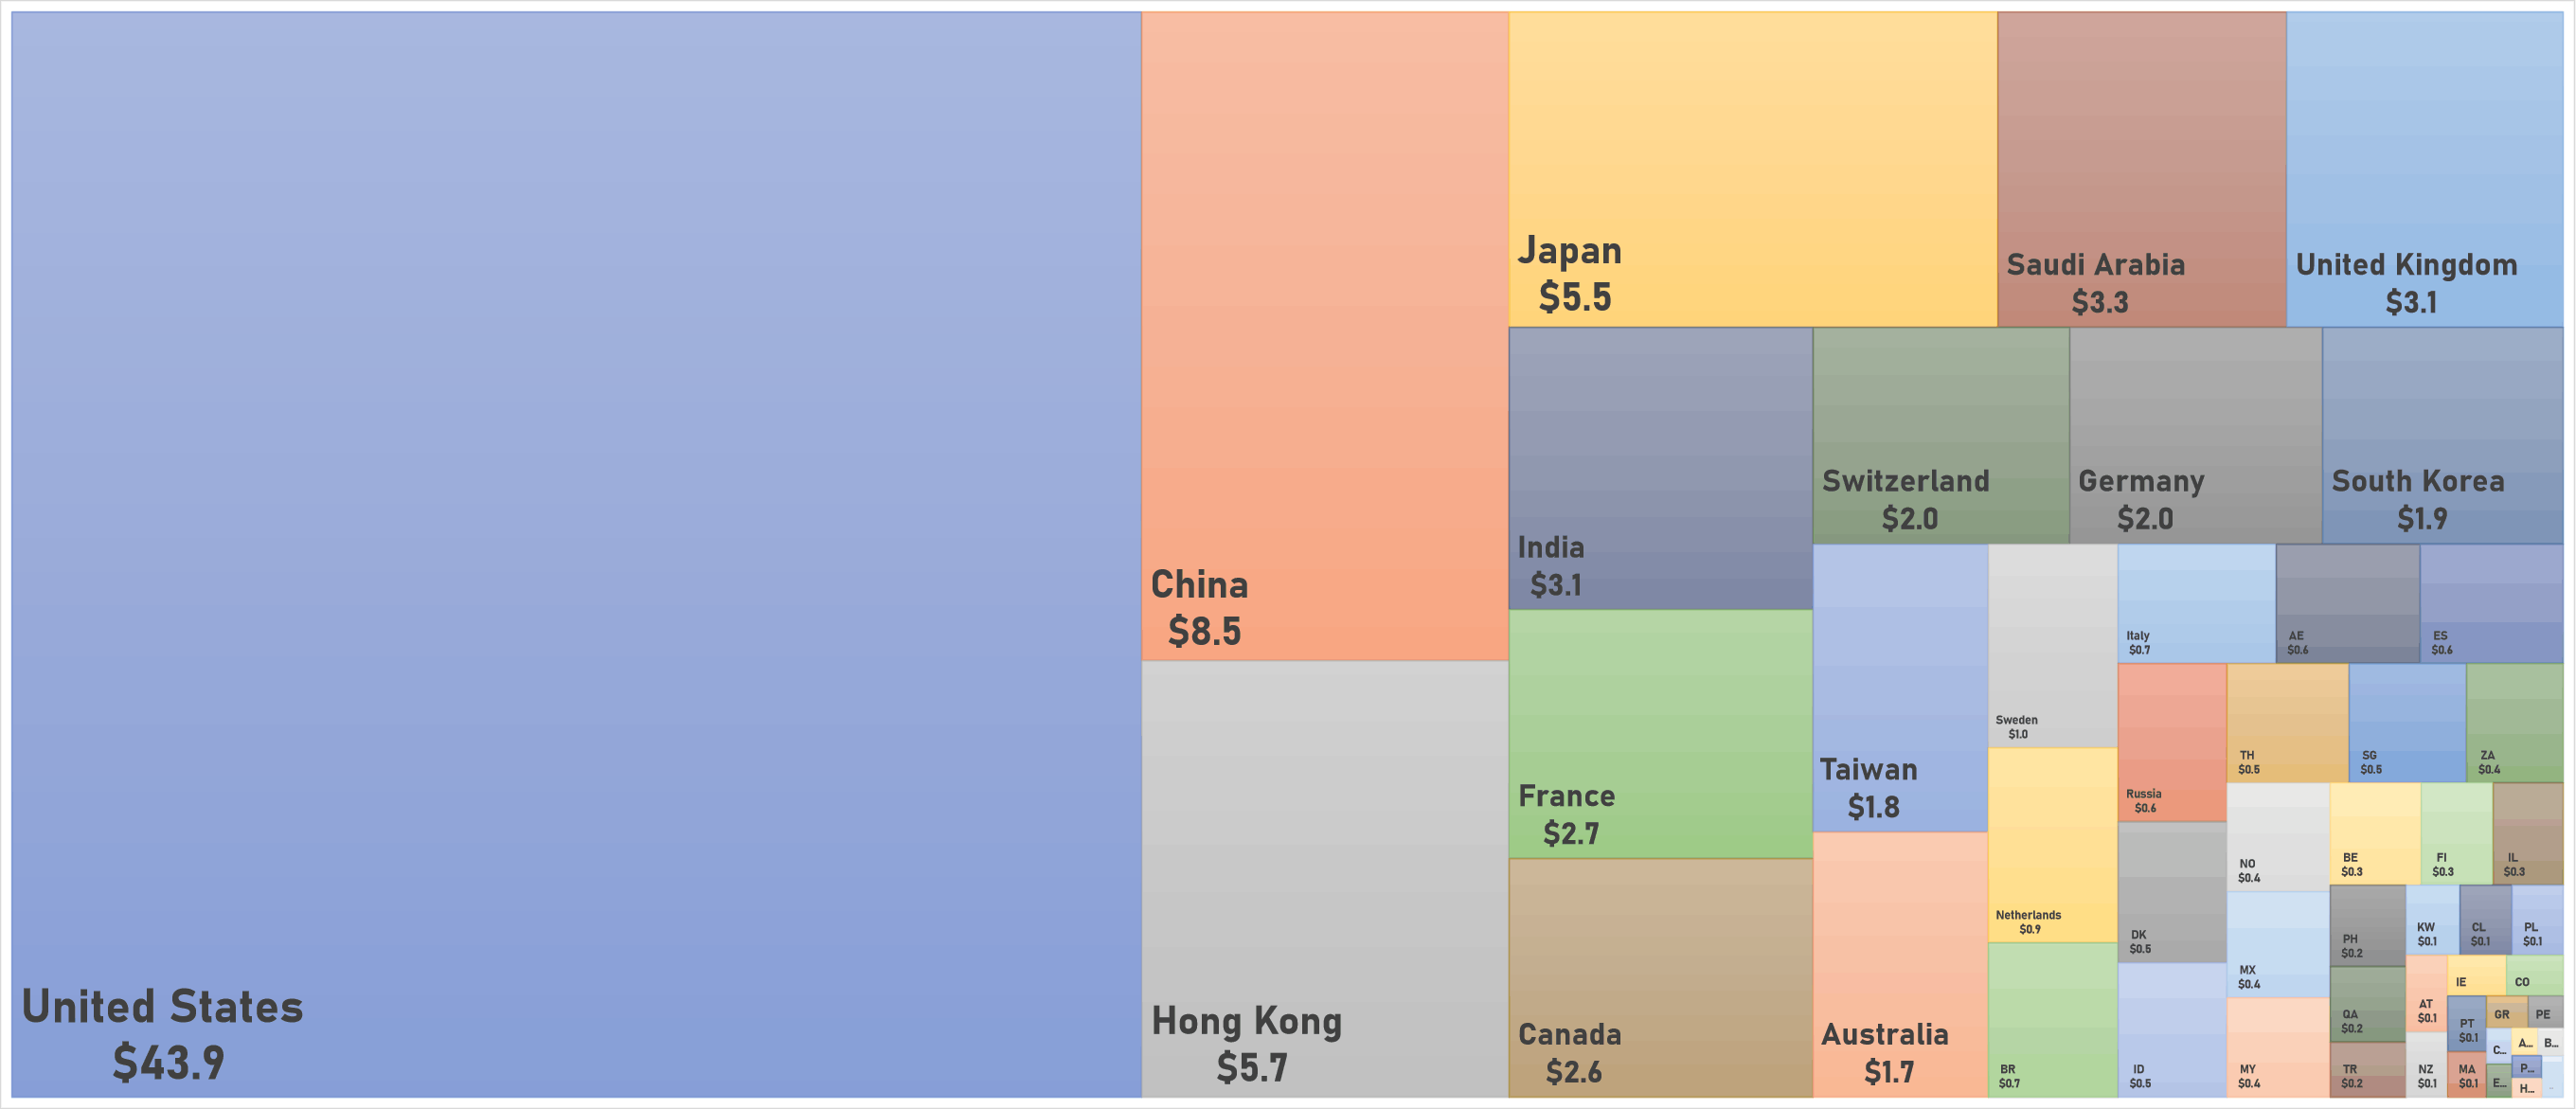 World Market Cap By Country | Sources: phipost.com, FactSet data